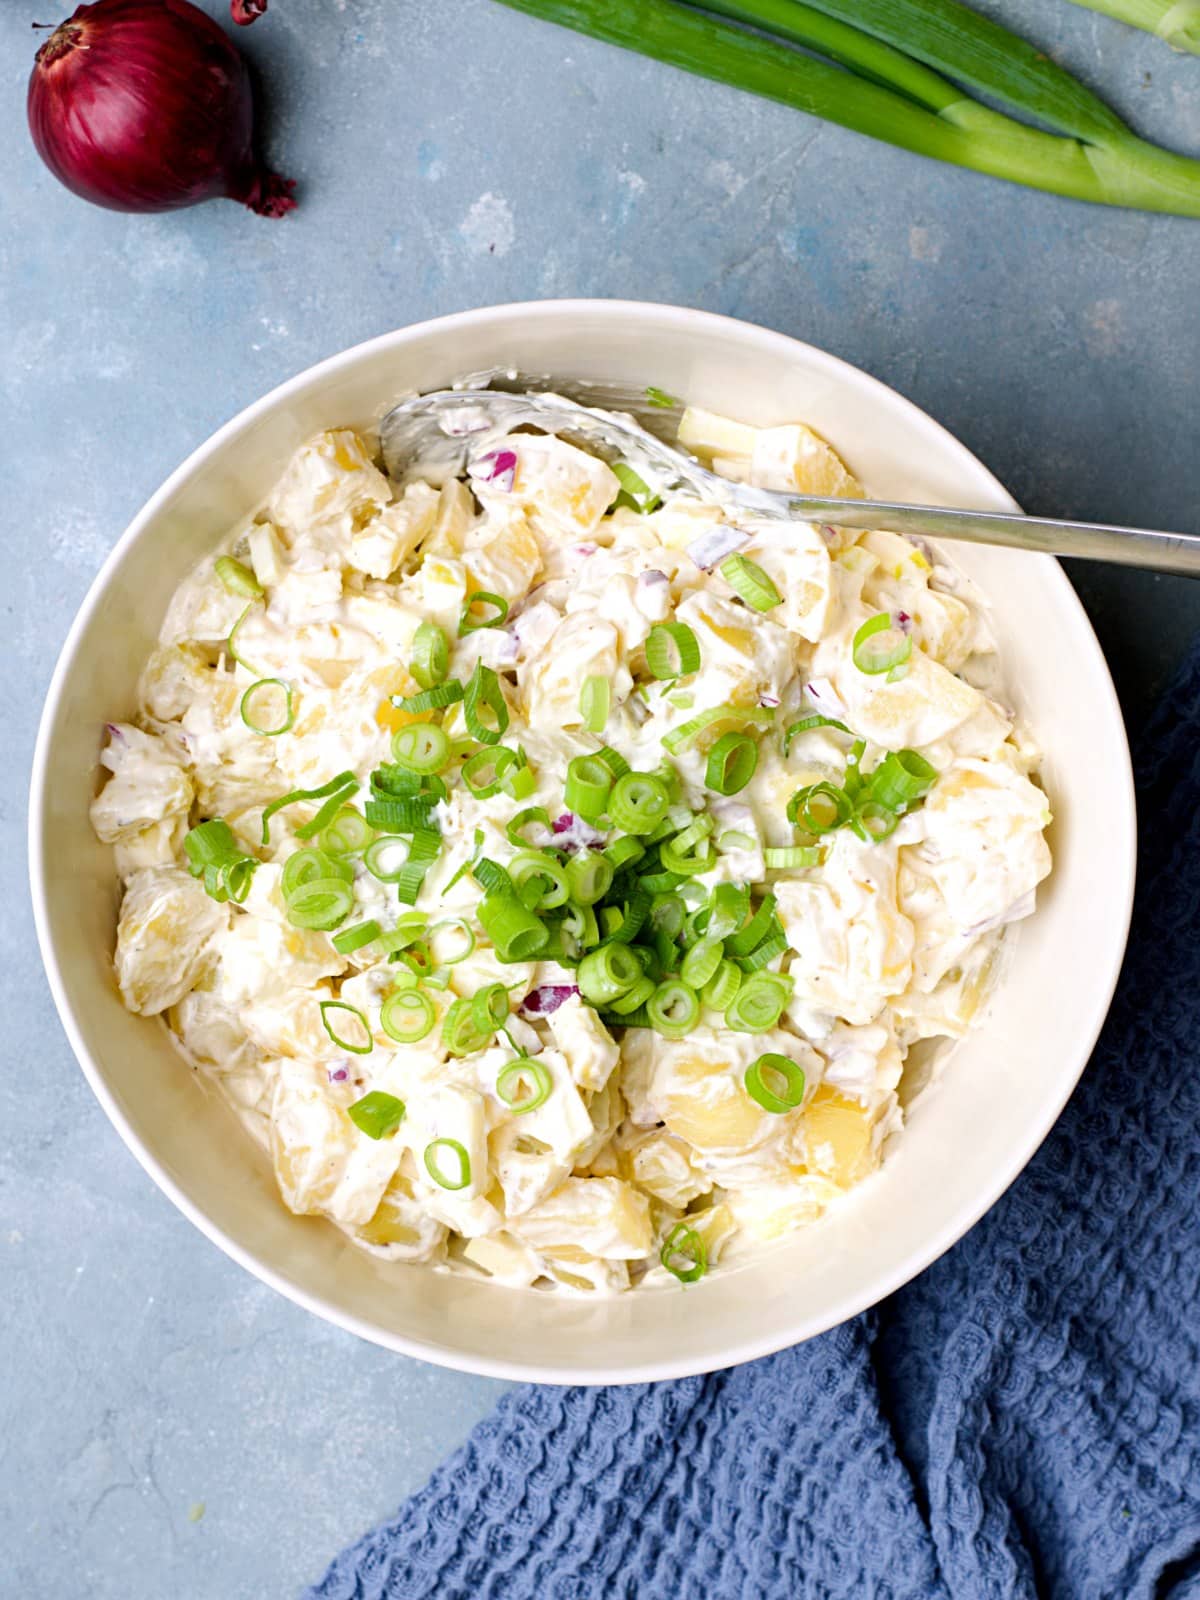 Potato salad in large bowl on blue background with silver ladle. 